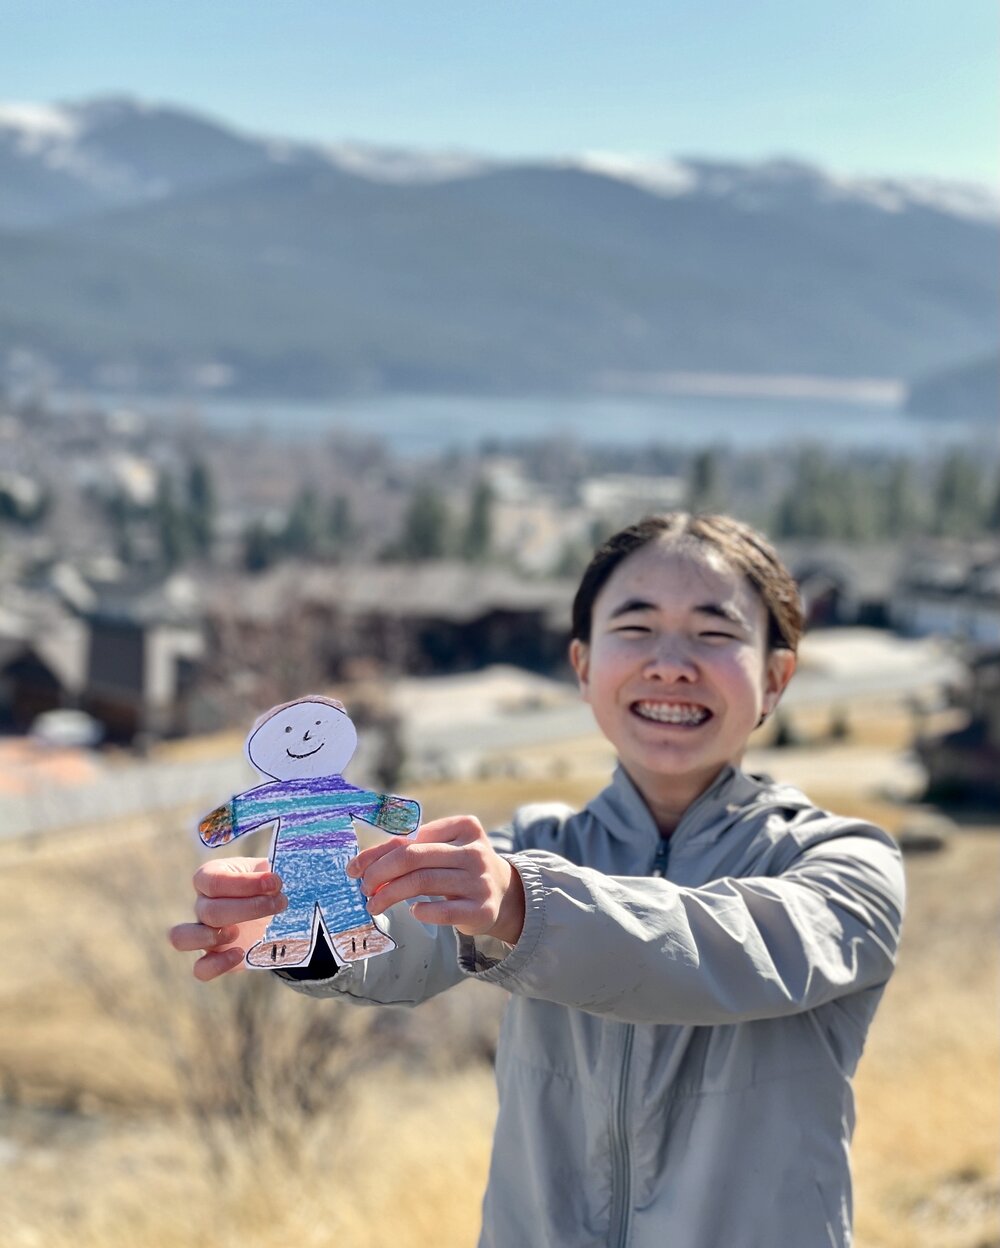 The Flat Stanley Project, developed by Dale Hubert connects kids to new locations and new people. Why not borrow this idea and use it when you travel. Bring along someone you LOVE!